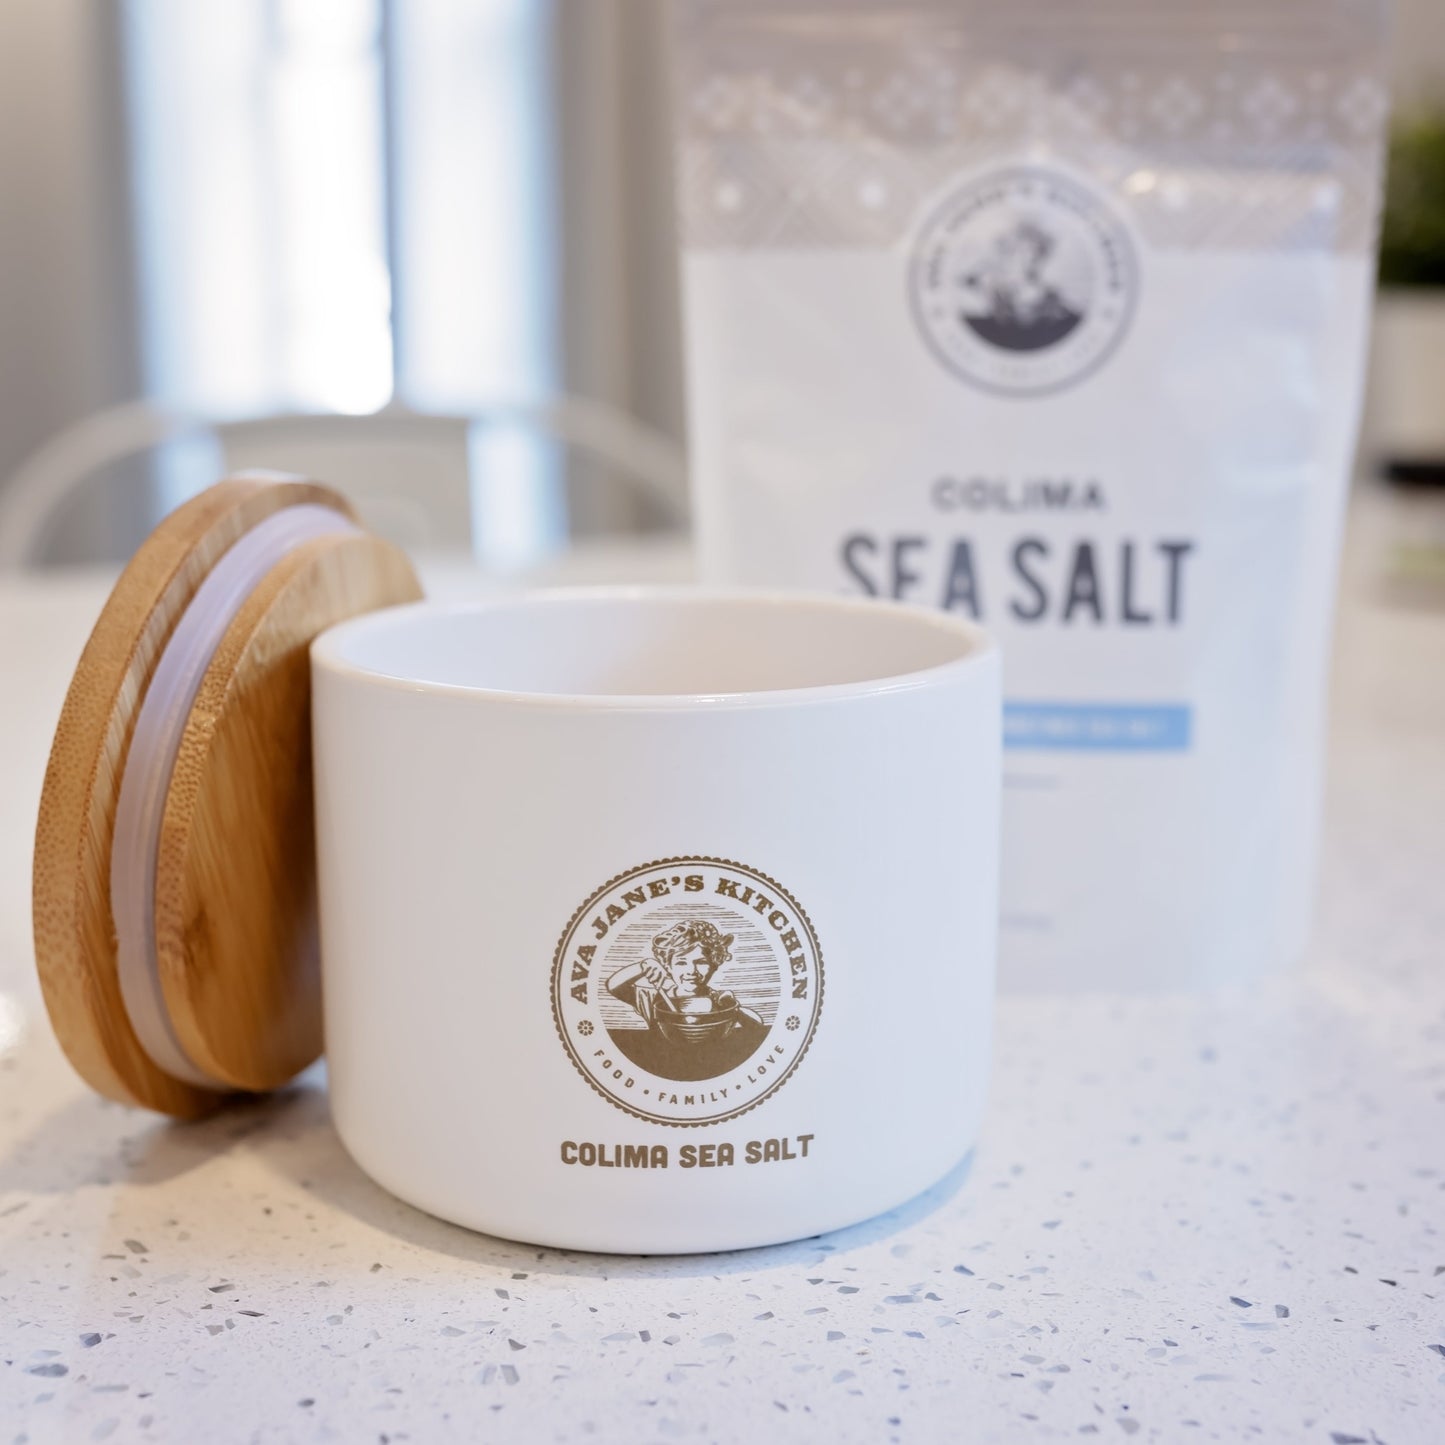 Ava Jane Kitchen's porcelain salt cellar sitting opened on the kitchen counter with a bag of colima sea salt in the background